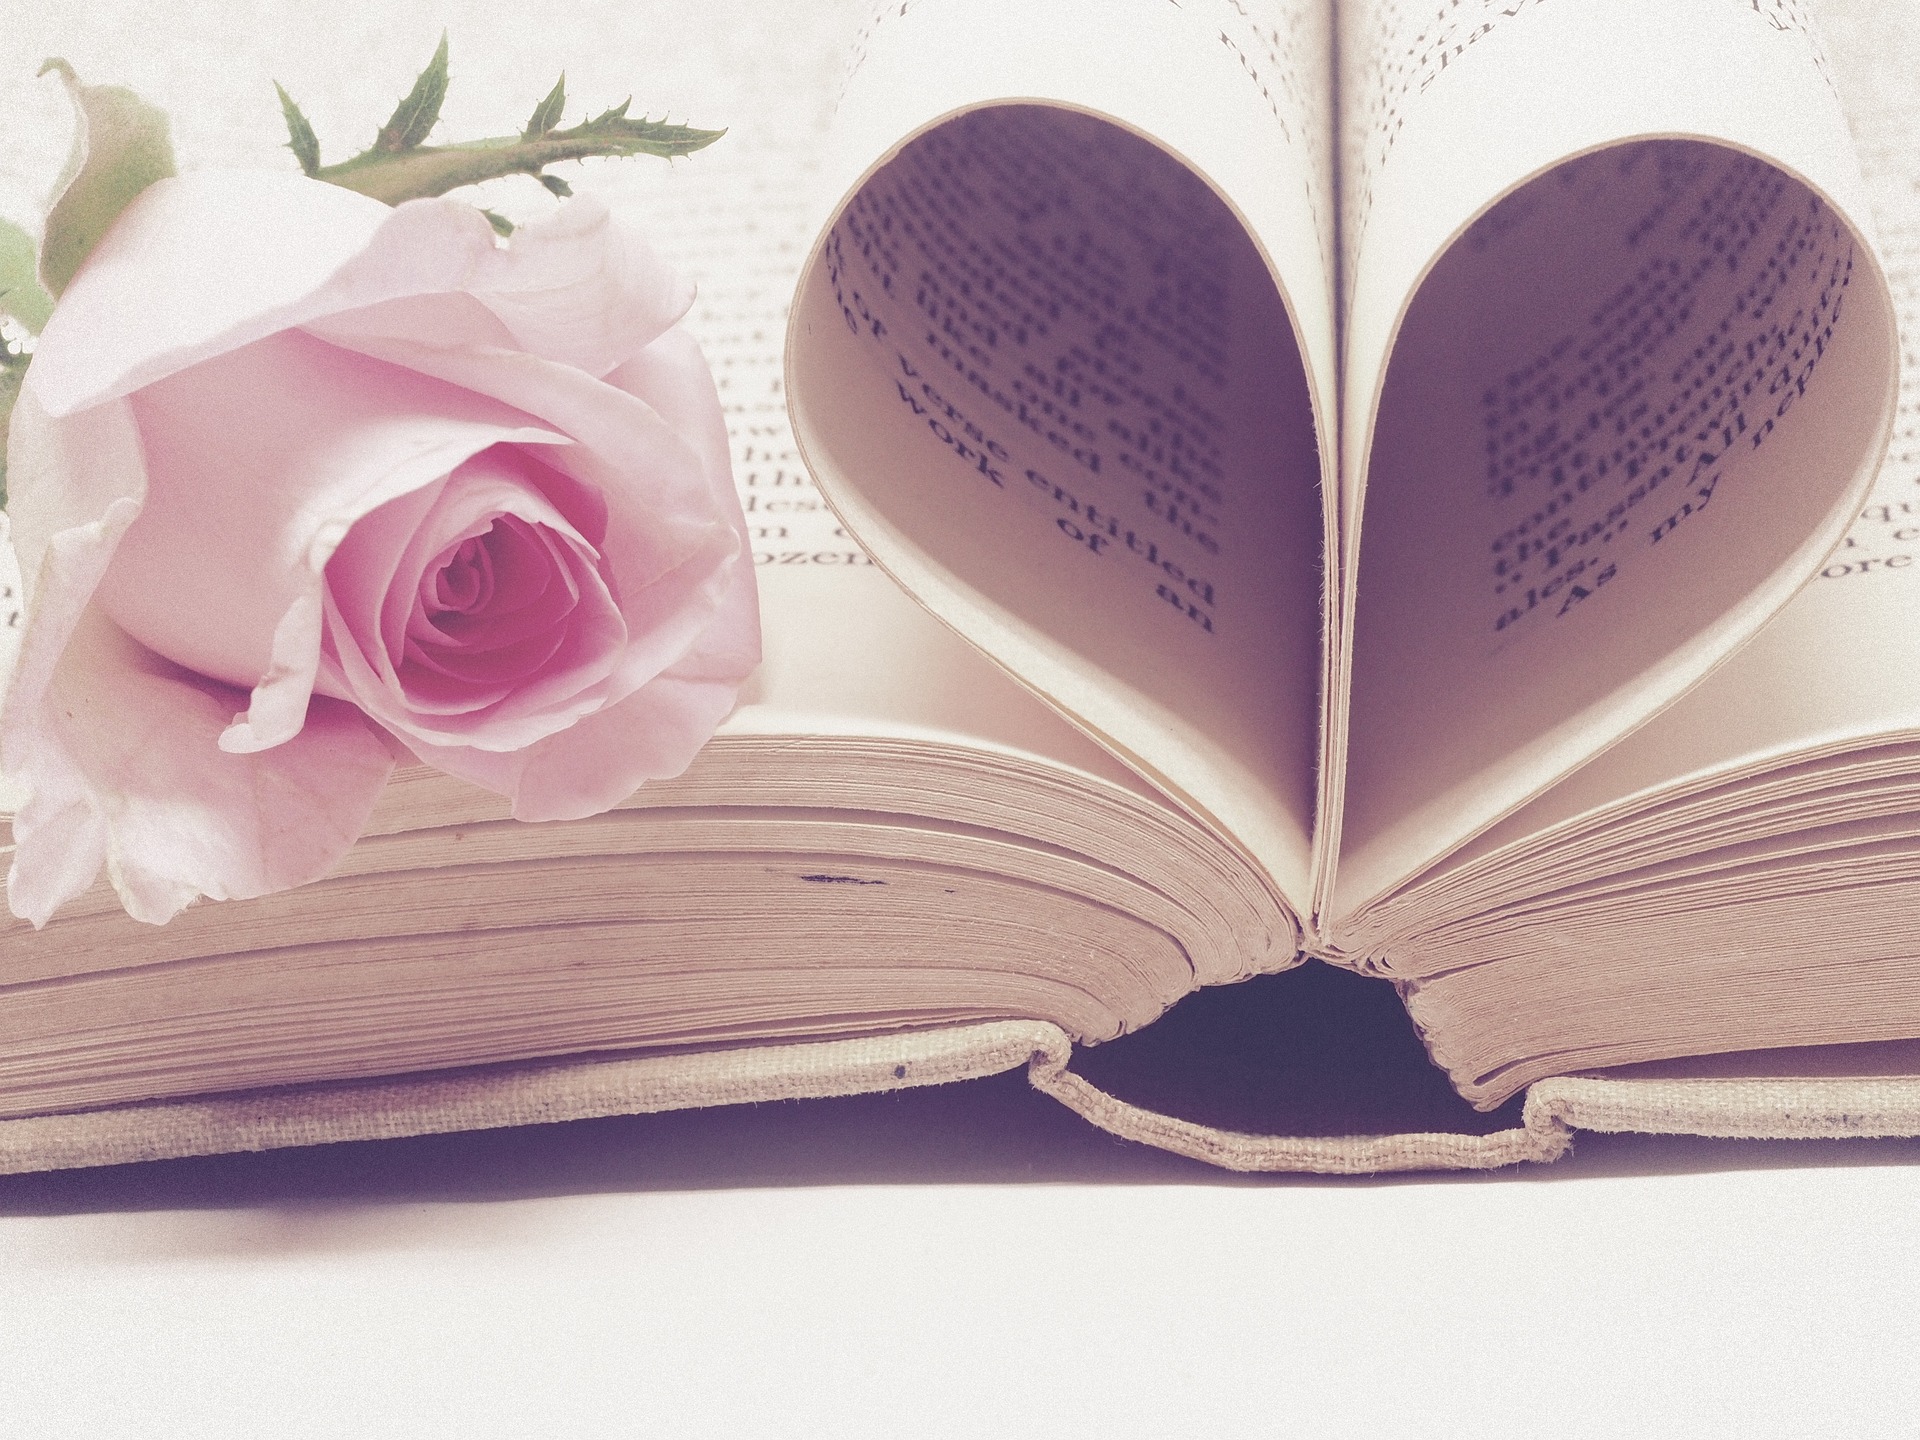 In soft focus: an open book with some of its pages folded up into the shape of a heart. A pink rose lies on the unfolded pages.